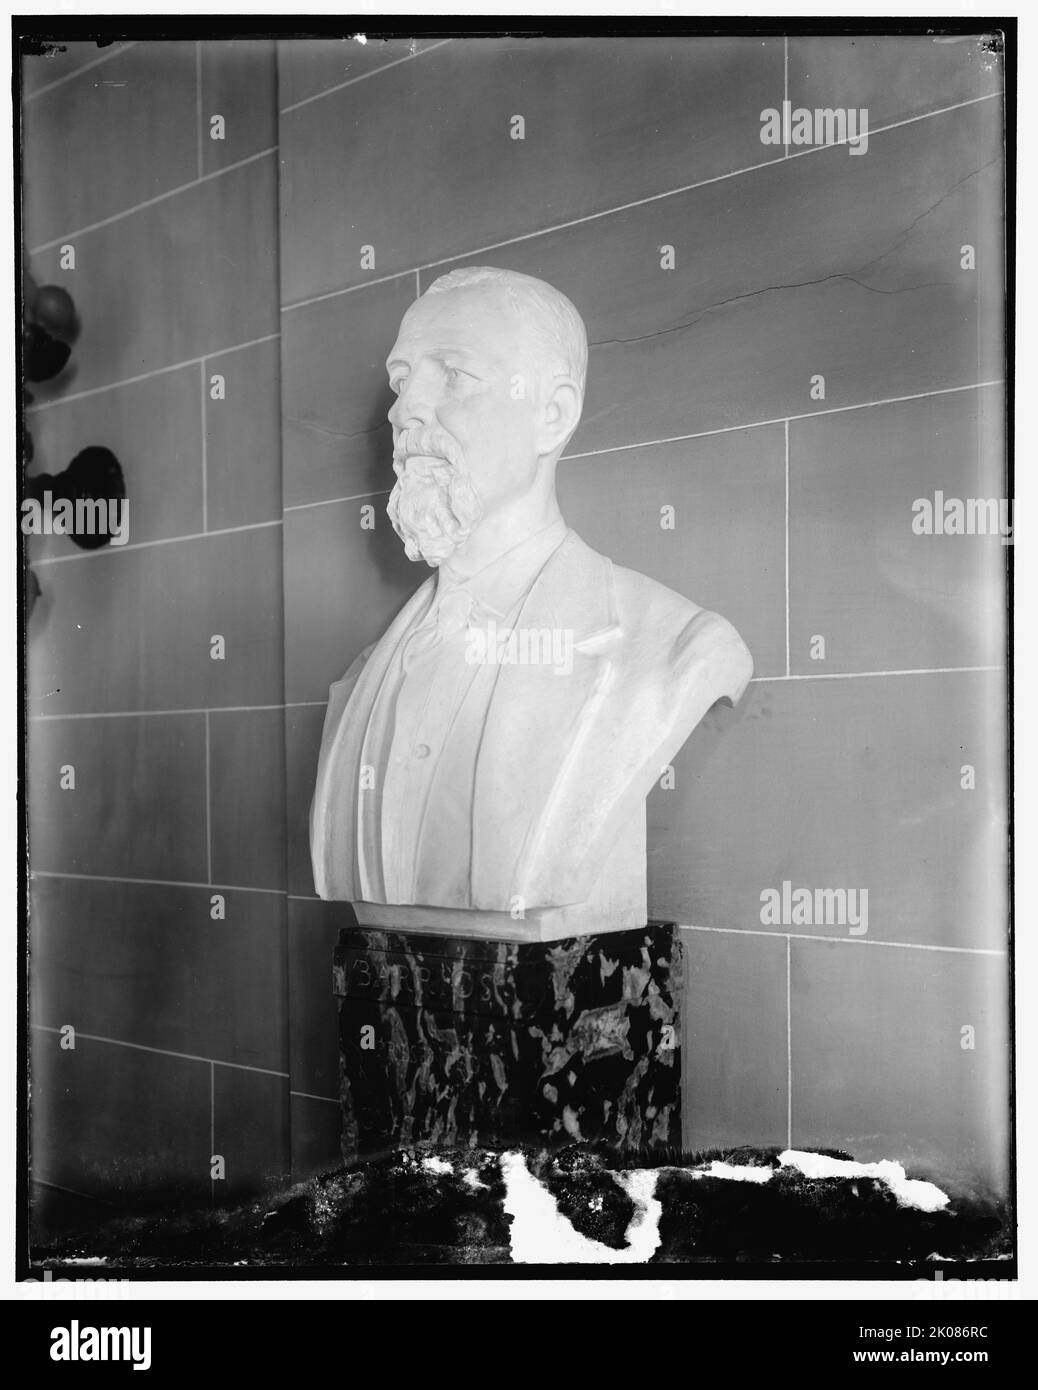 Sculpture of Barrios, presented by Guatemala, between 1910 and 1920. Bust of Guatemalan president Justo Rufino Barrios in the Pan American Union Building, headquarters for the Organization of American States, Washington, D.C. Stock Photo